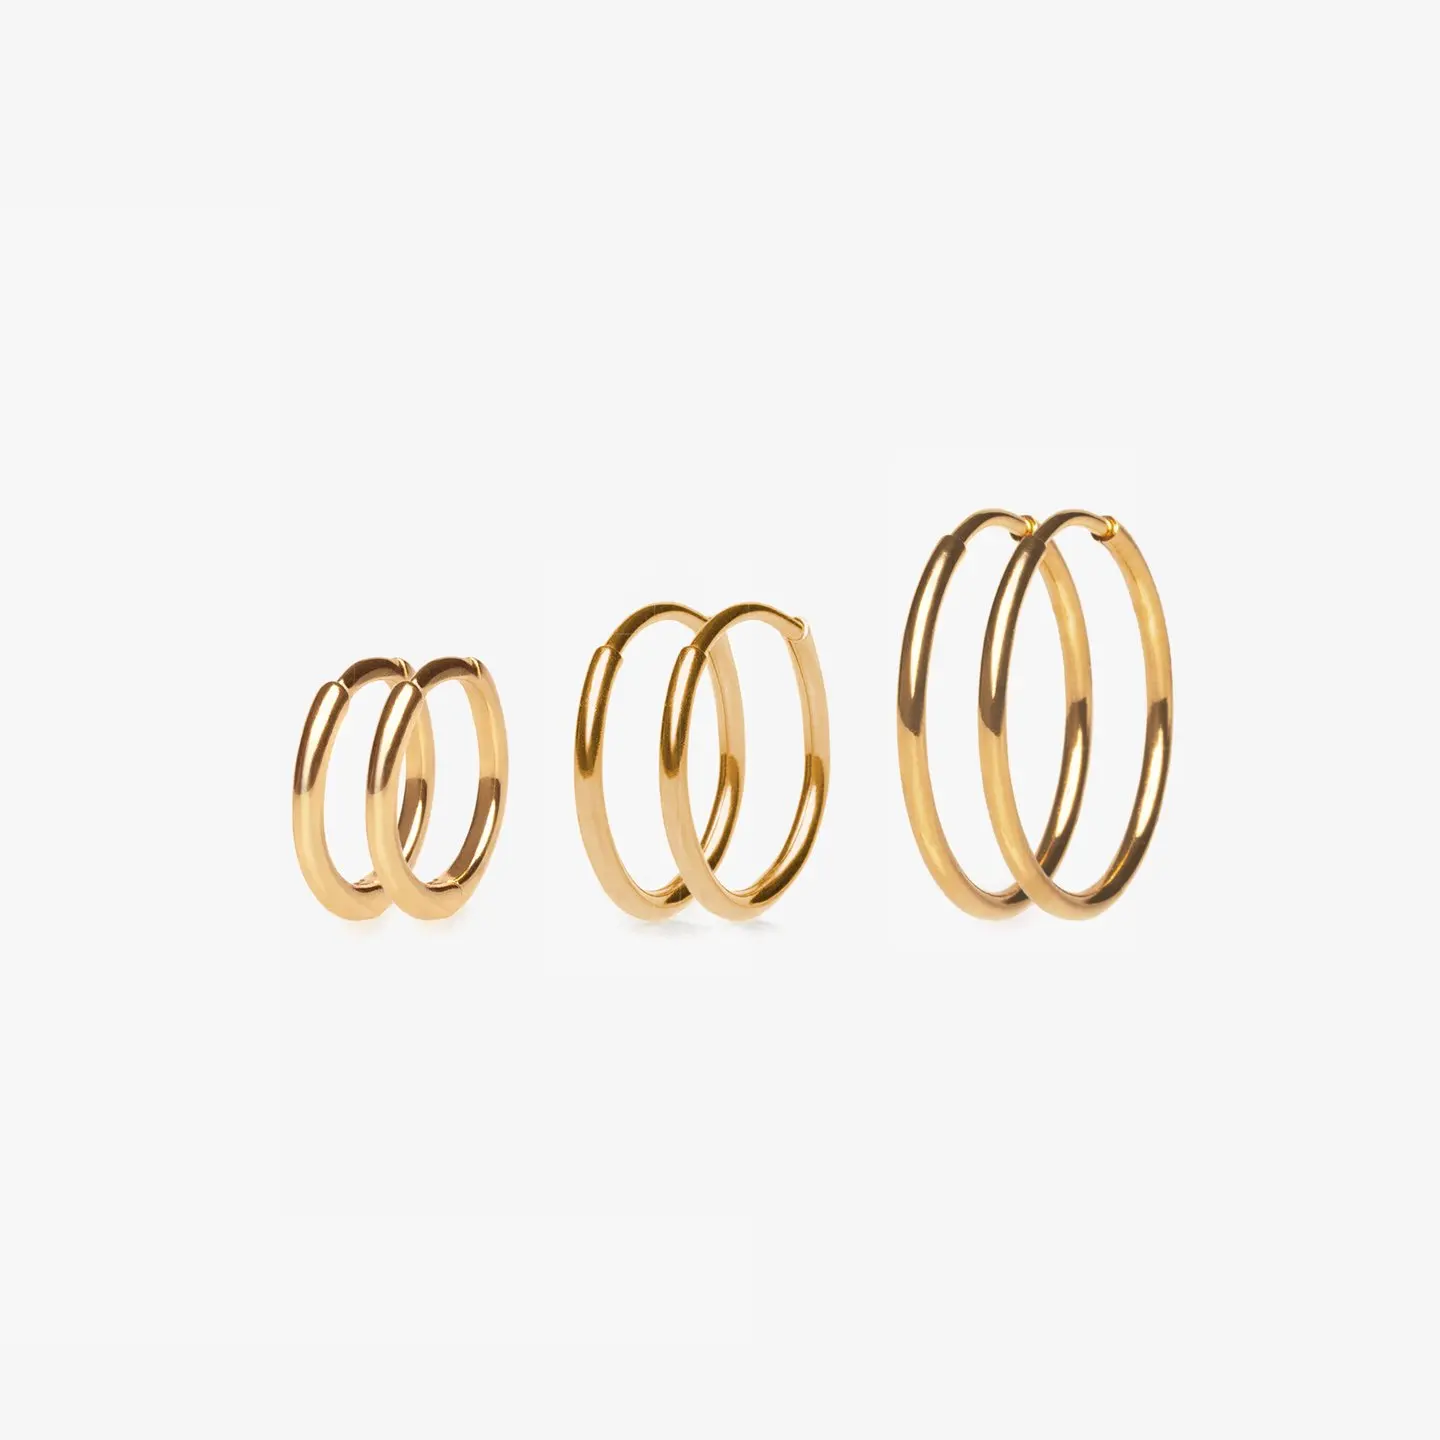 Aliexpress - 2020 New Minimalism Stainless Steel Woman Jewelry 14k Gold Plated Small Medium Large Size Loop Hoop Earrings for Women